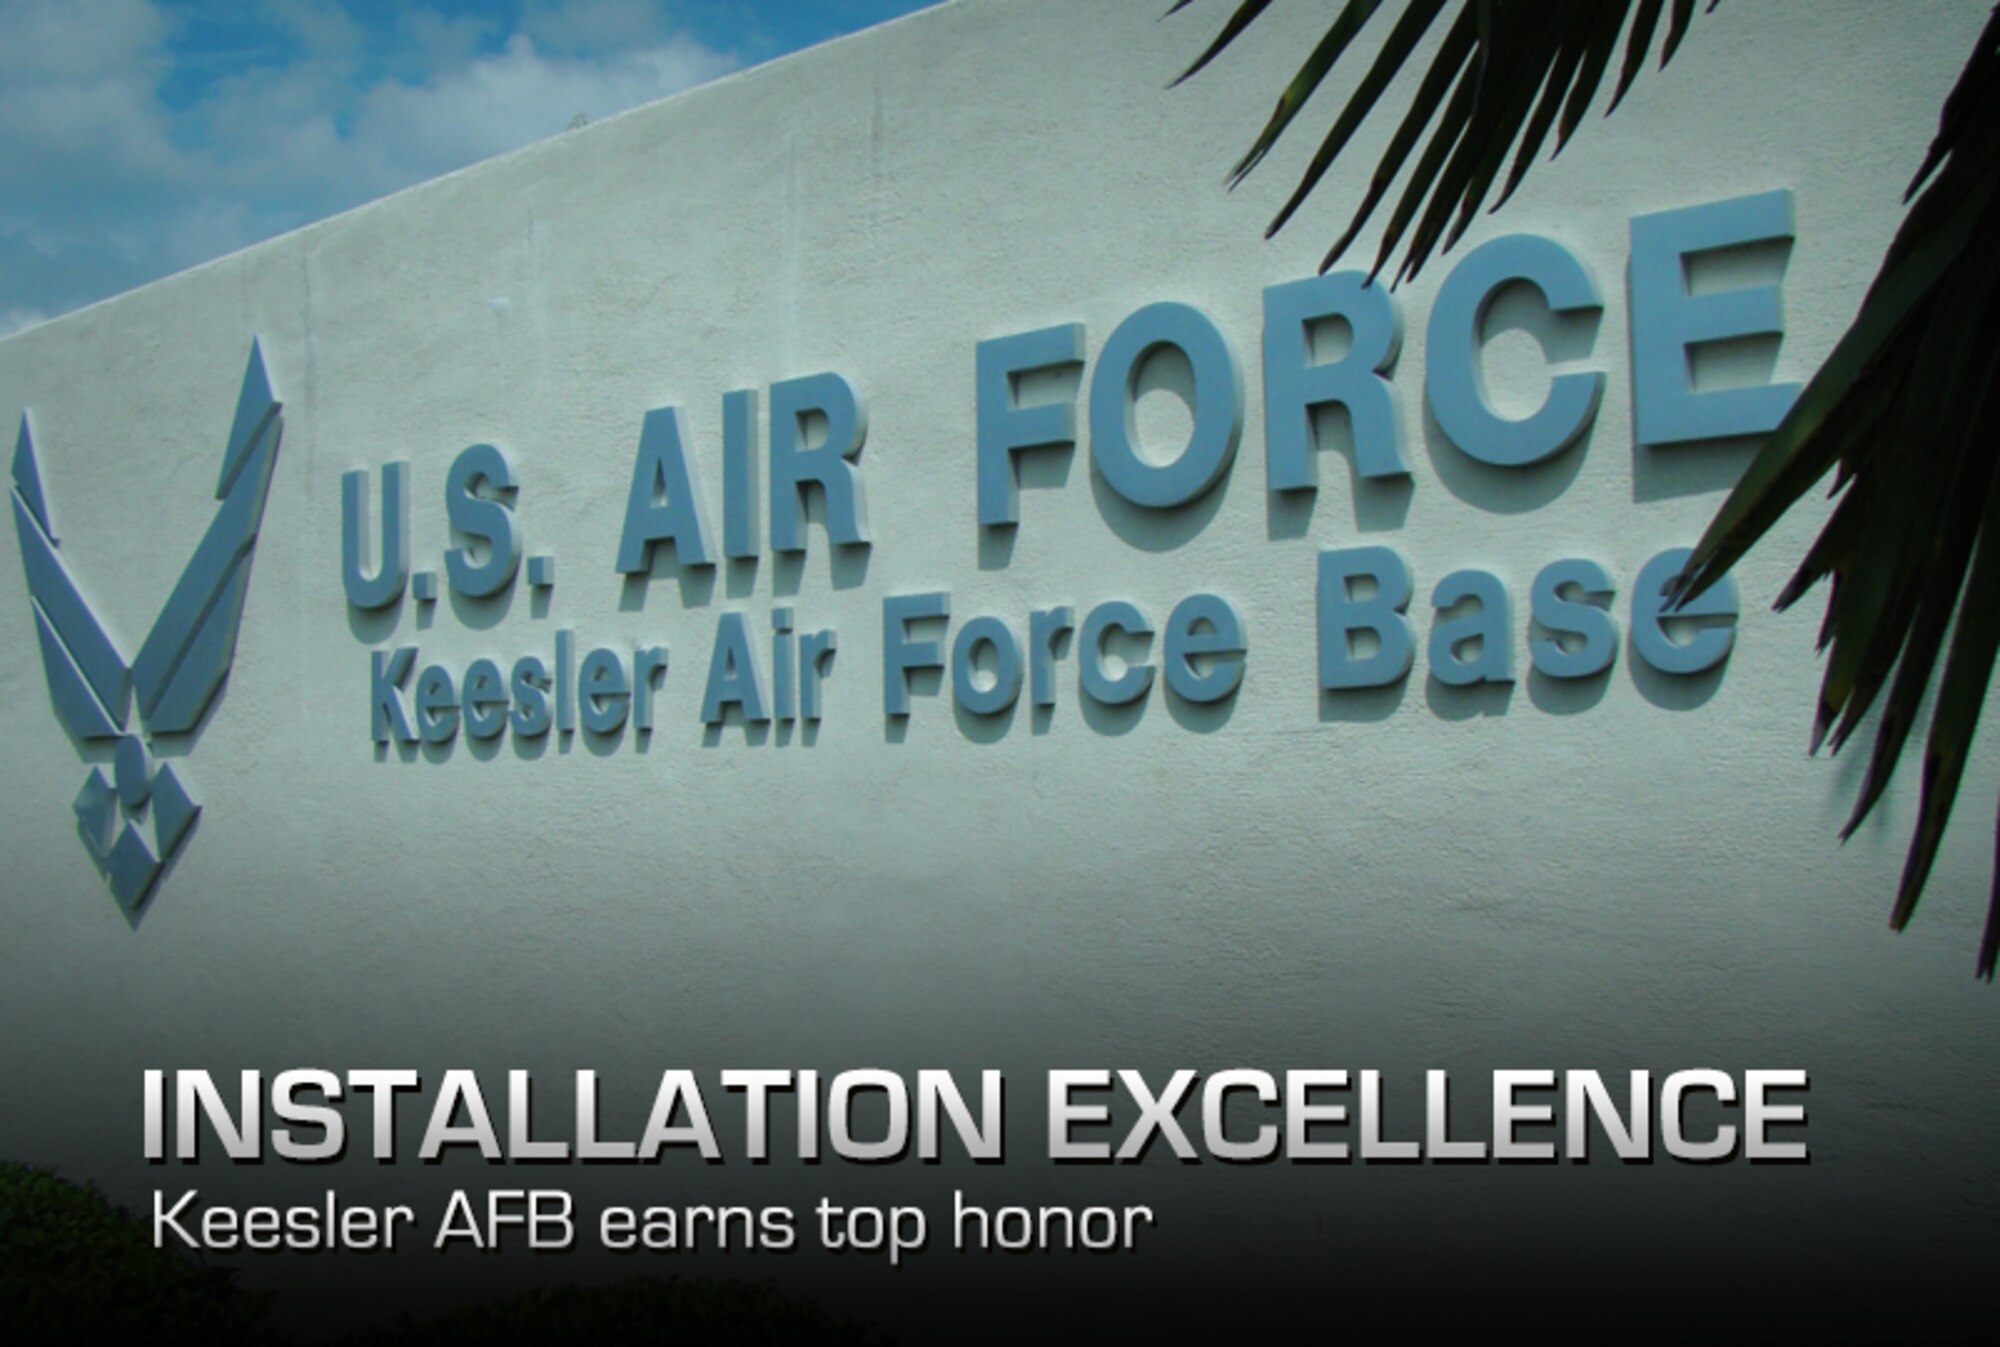 Defense Secretary Chuck Hagel announced Keesler Air Force Base, Miss., as one of the 2013 recipients of the Commander in Chief's Annual Award for Installation Excellence May 20, 2013.